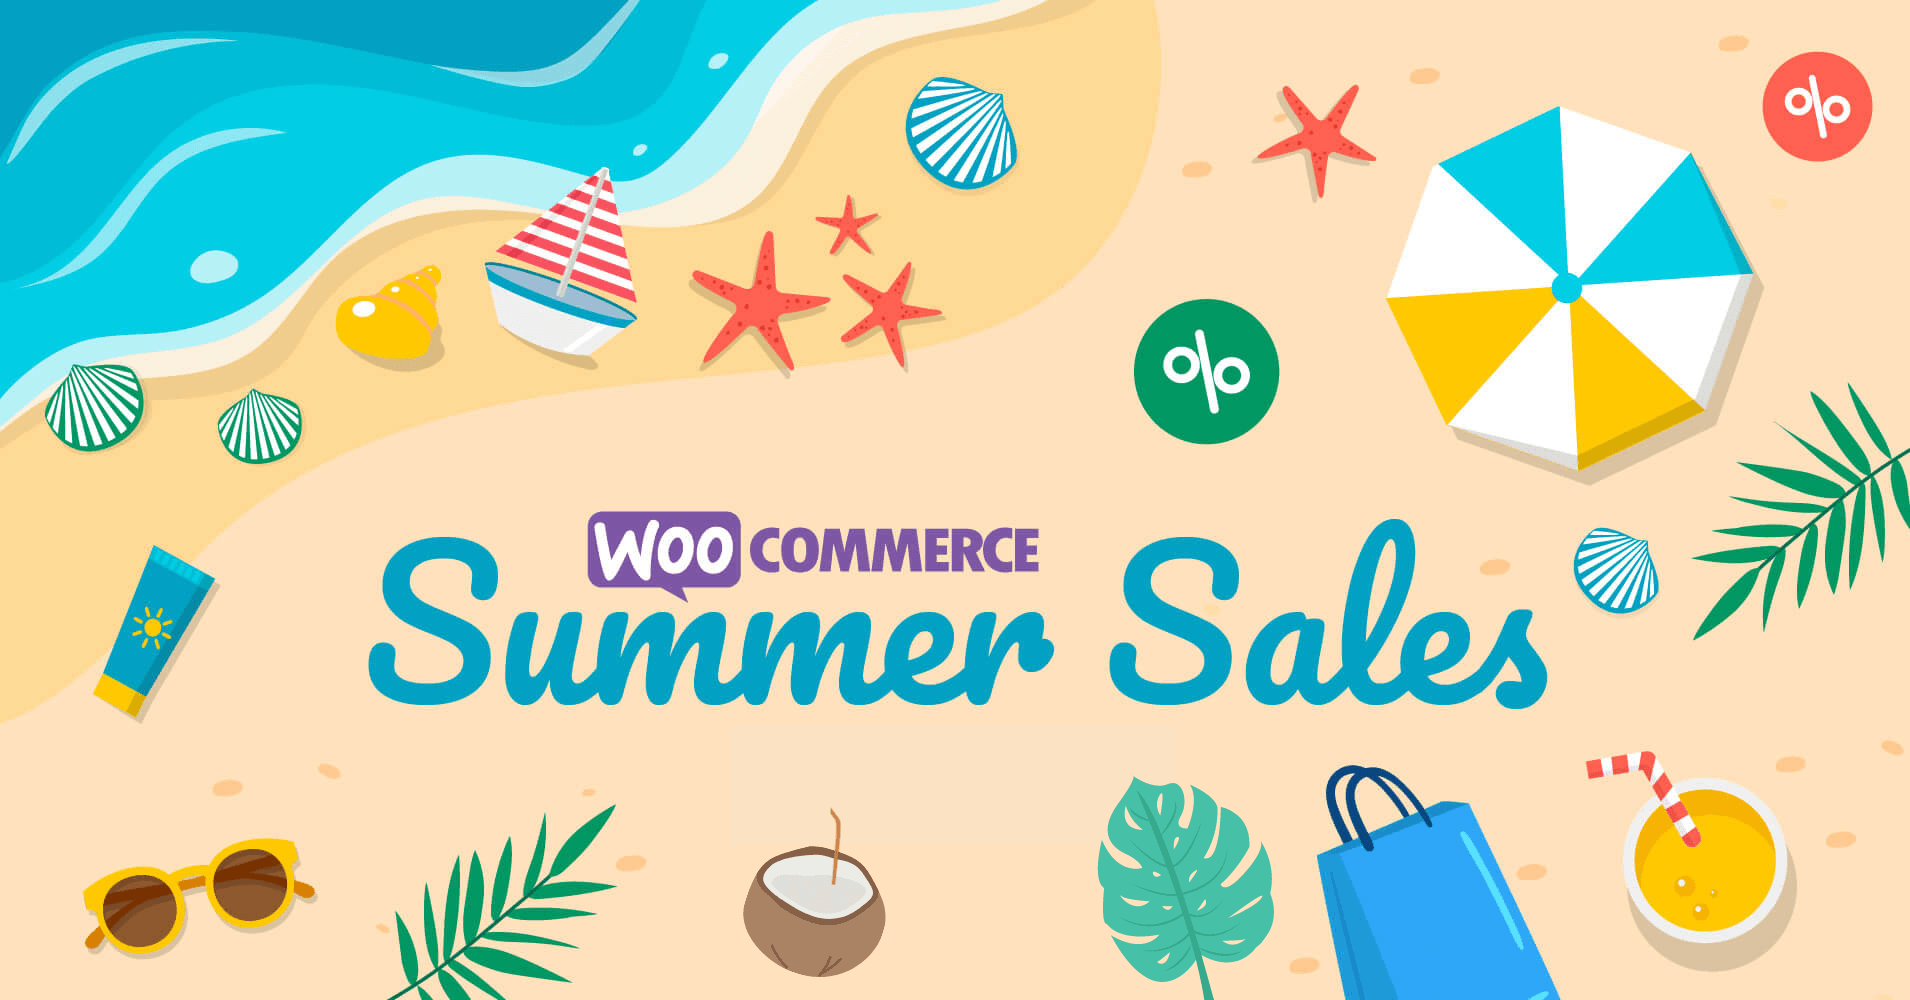 Use the right tools to increase WooCommerce sales 2022